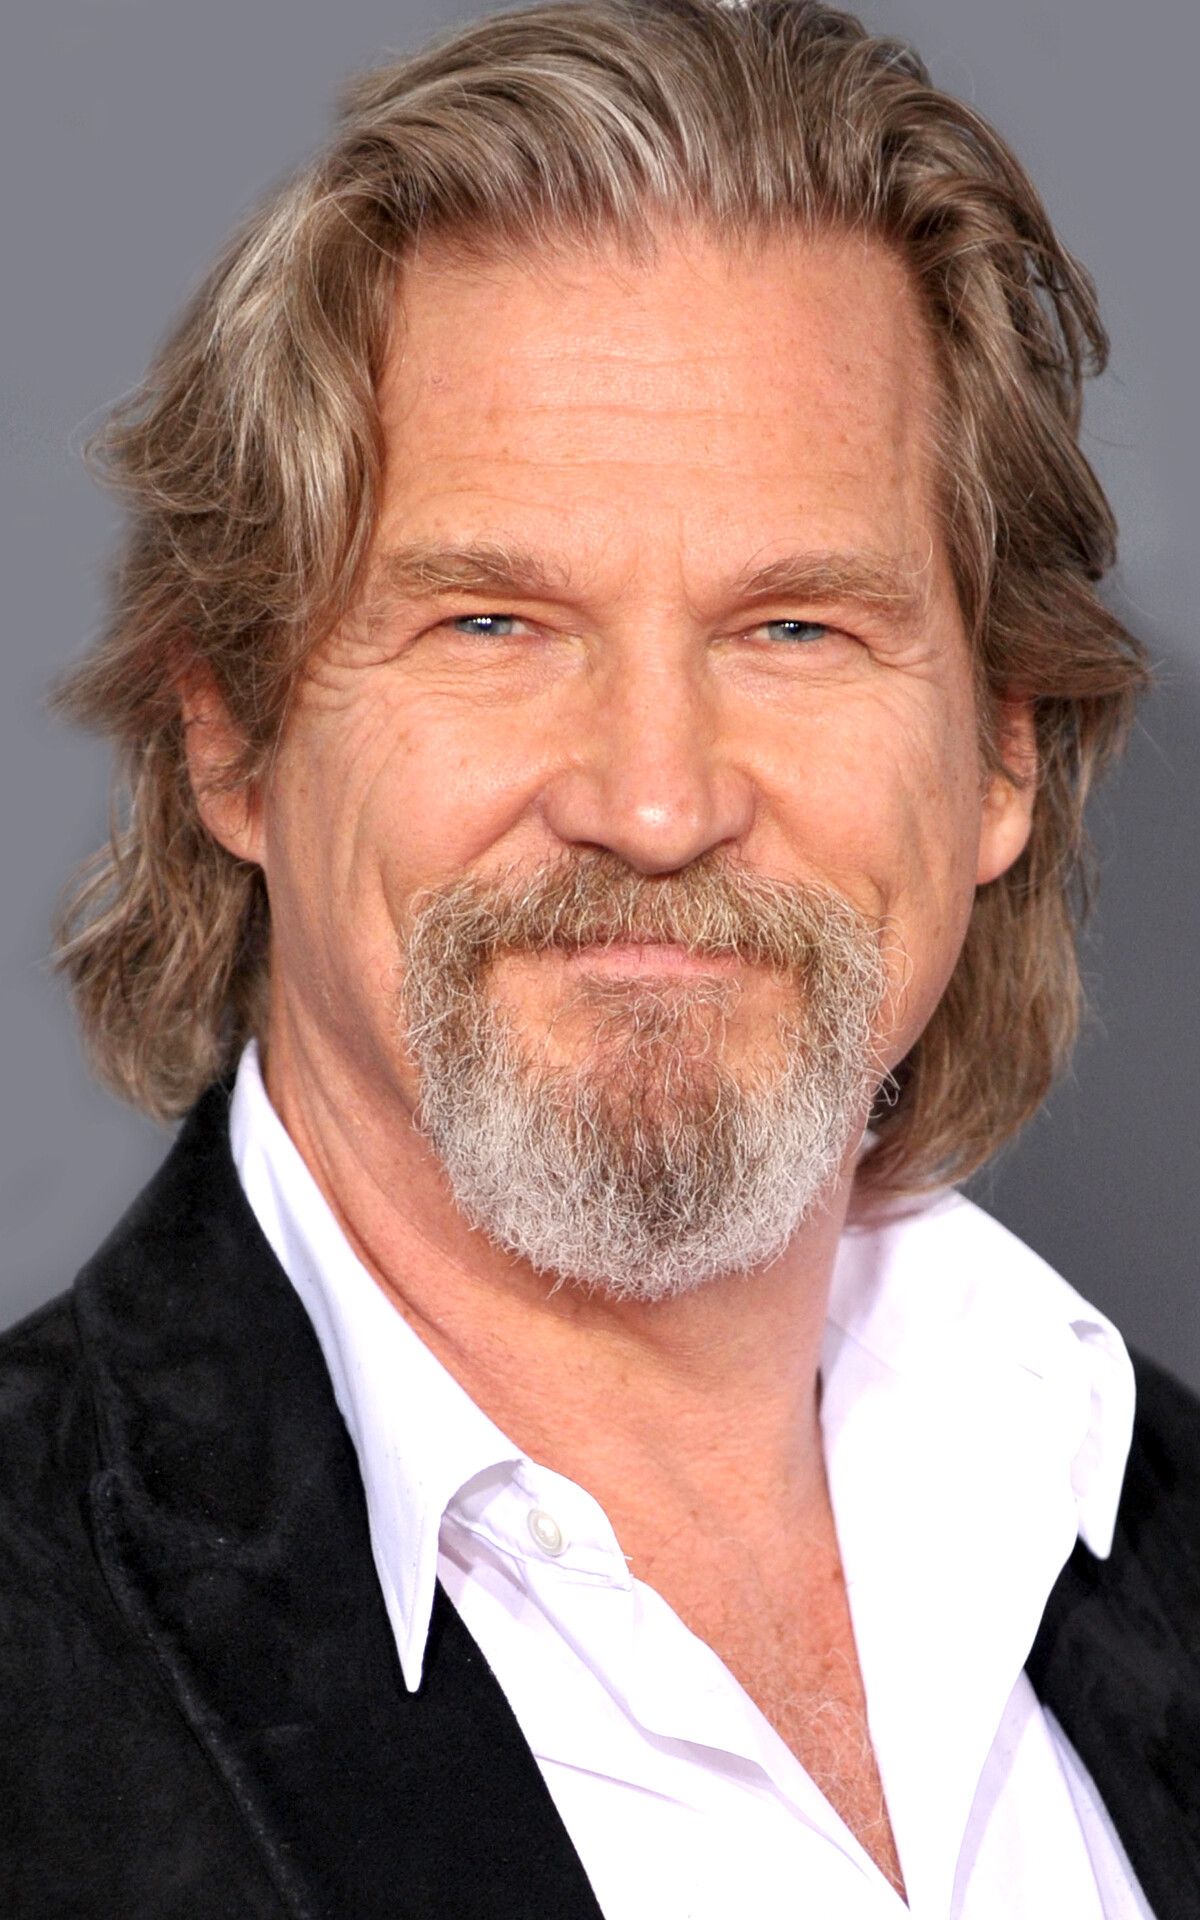 Jeff Bridges: An Academy Award-winning actor, An anti-hunger activist and advocate for children, No Kid Hungry campaign. 1200x1920 HD Wallpaper.